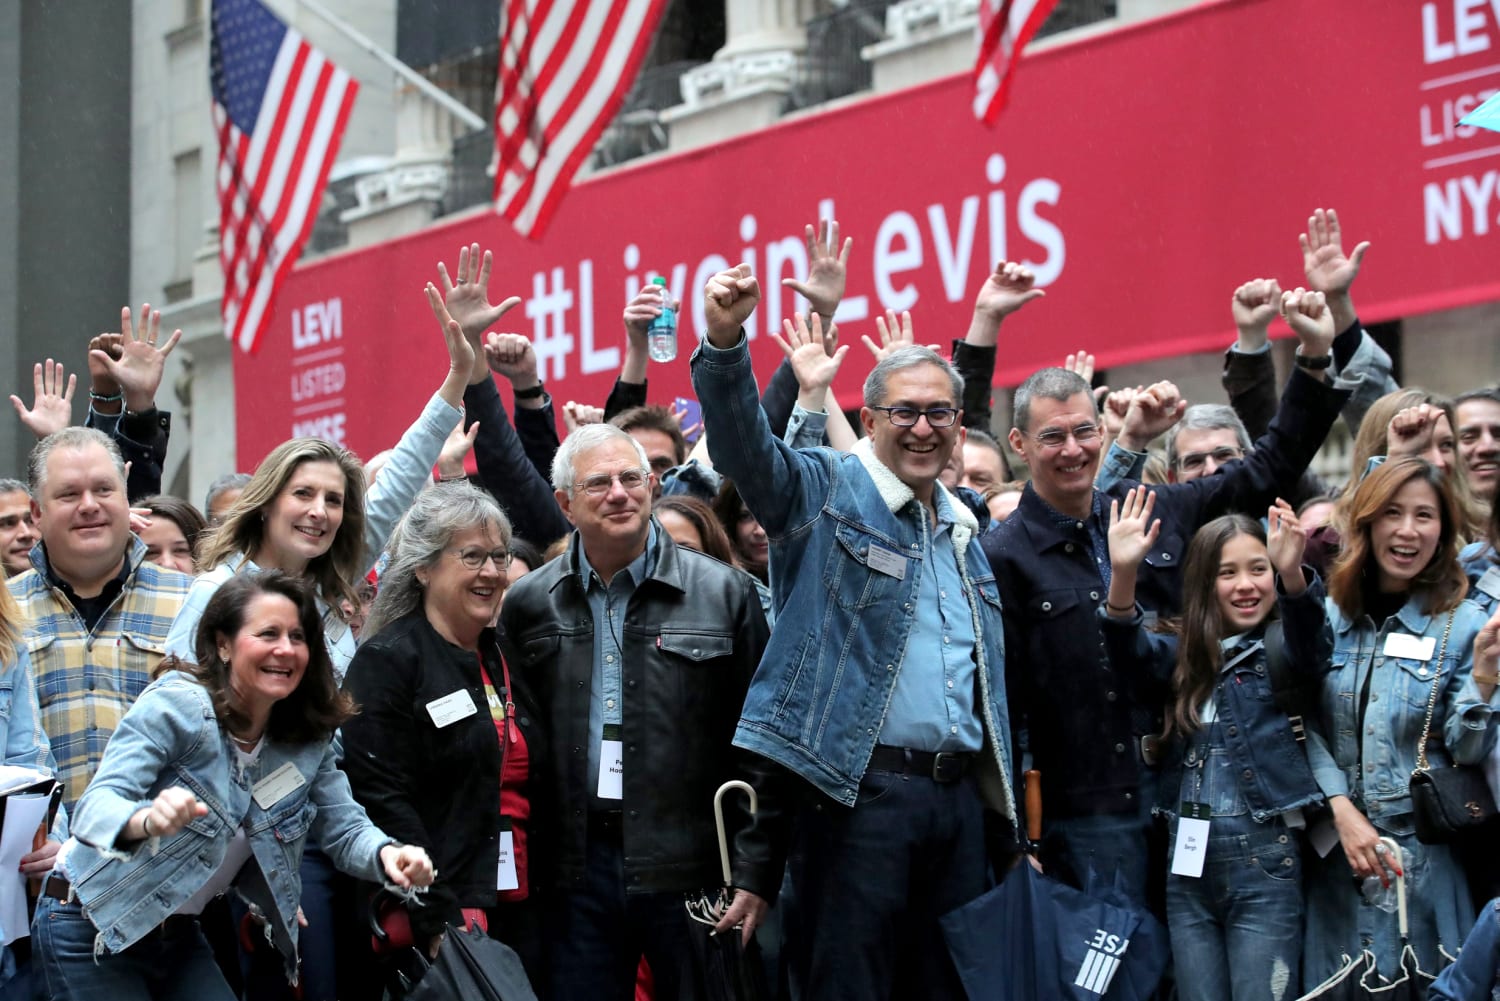 Levi's just went public, kicking off a new wave of red-hot IPOs